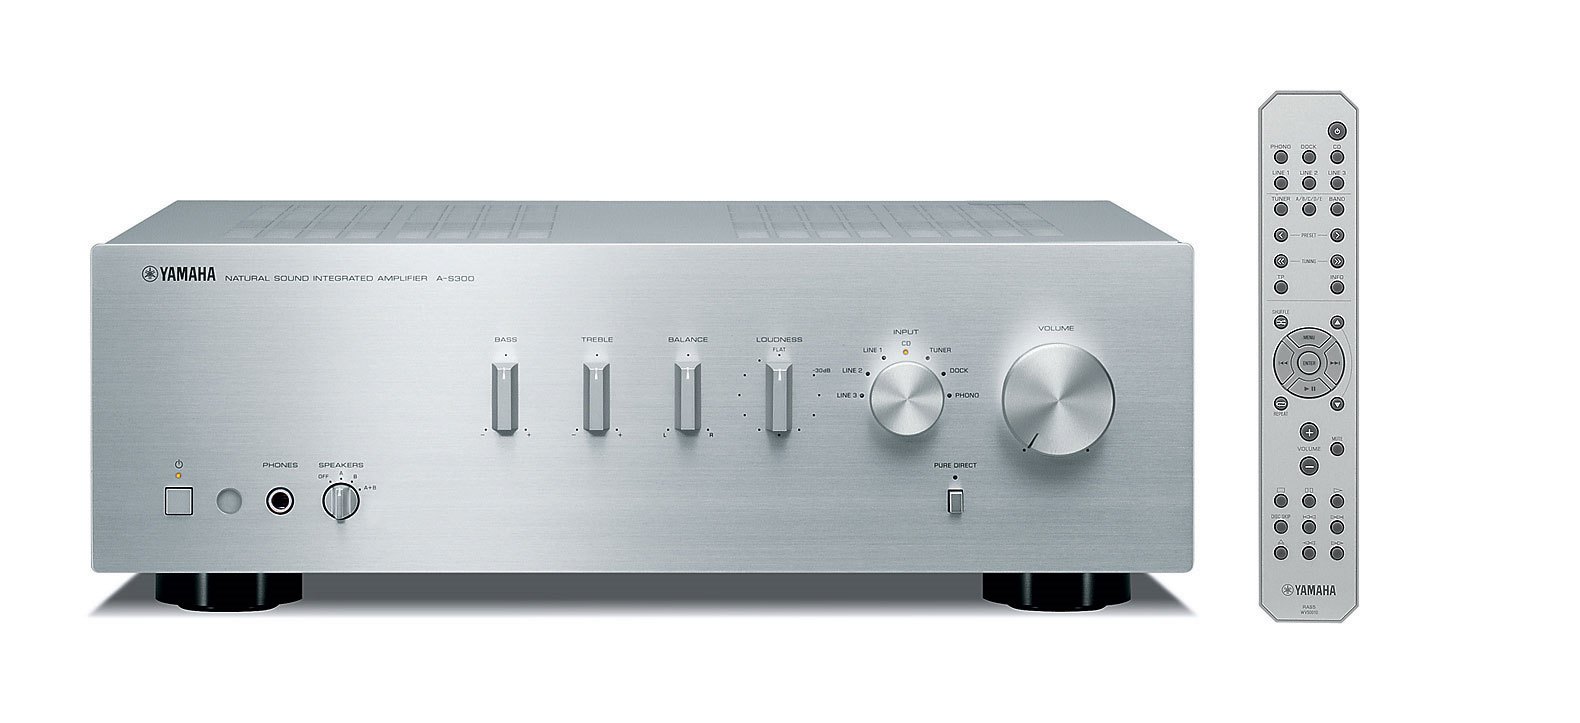 A-S300 - Overview - Hi-Fi Components - Audio & Visual - Products 